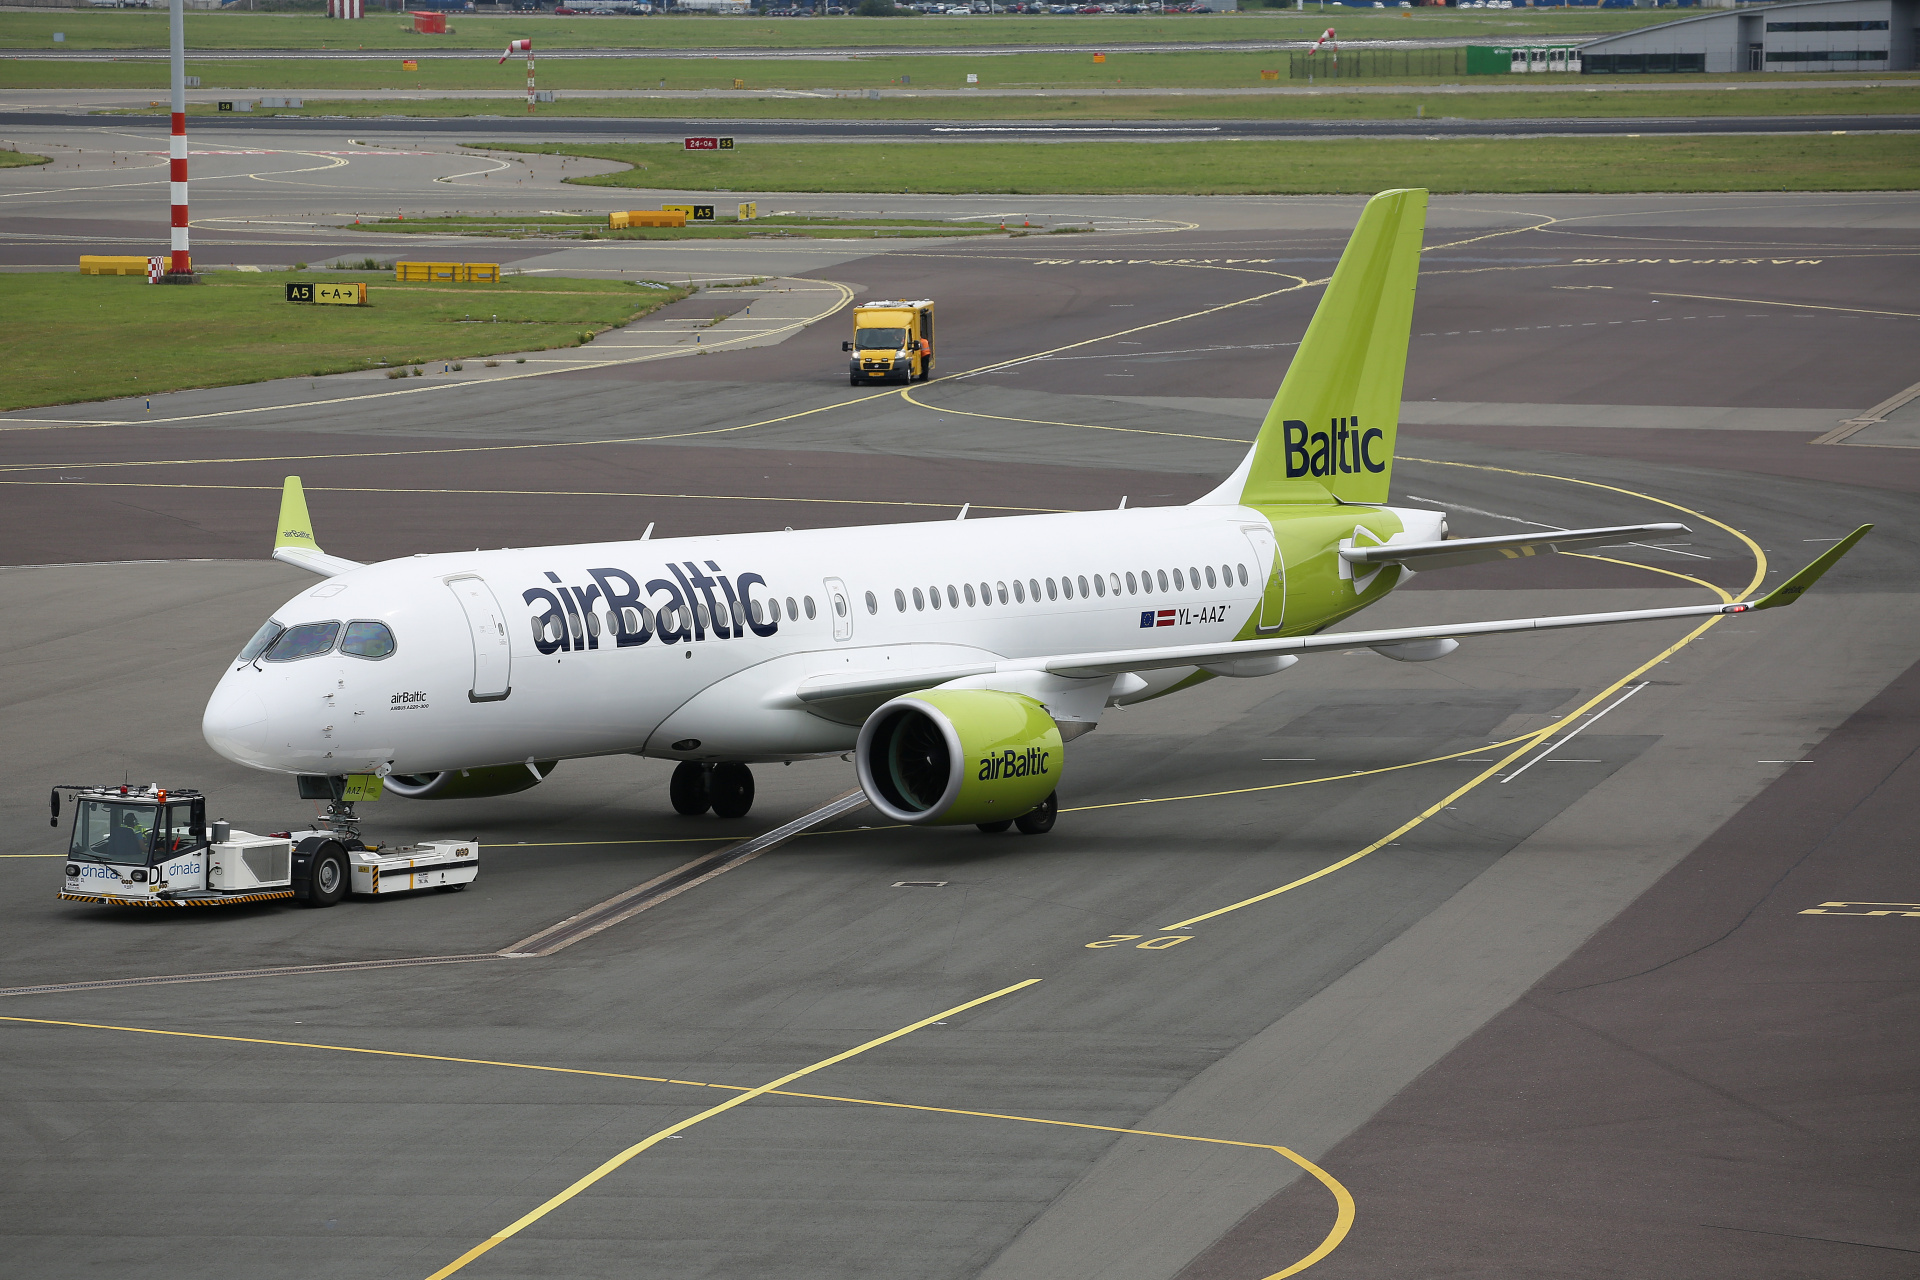 YL-AAZ, airBaltic (Aircraft » Schiphol Spotting » Airbus A220-300)